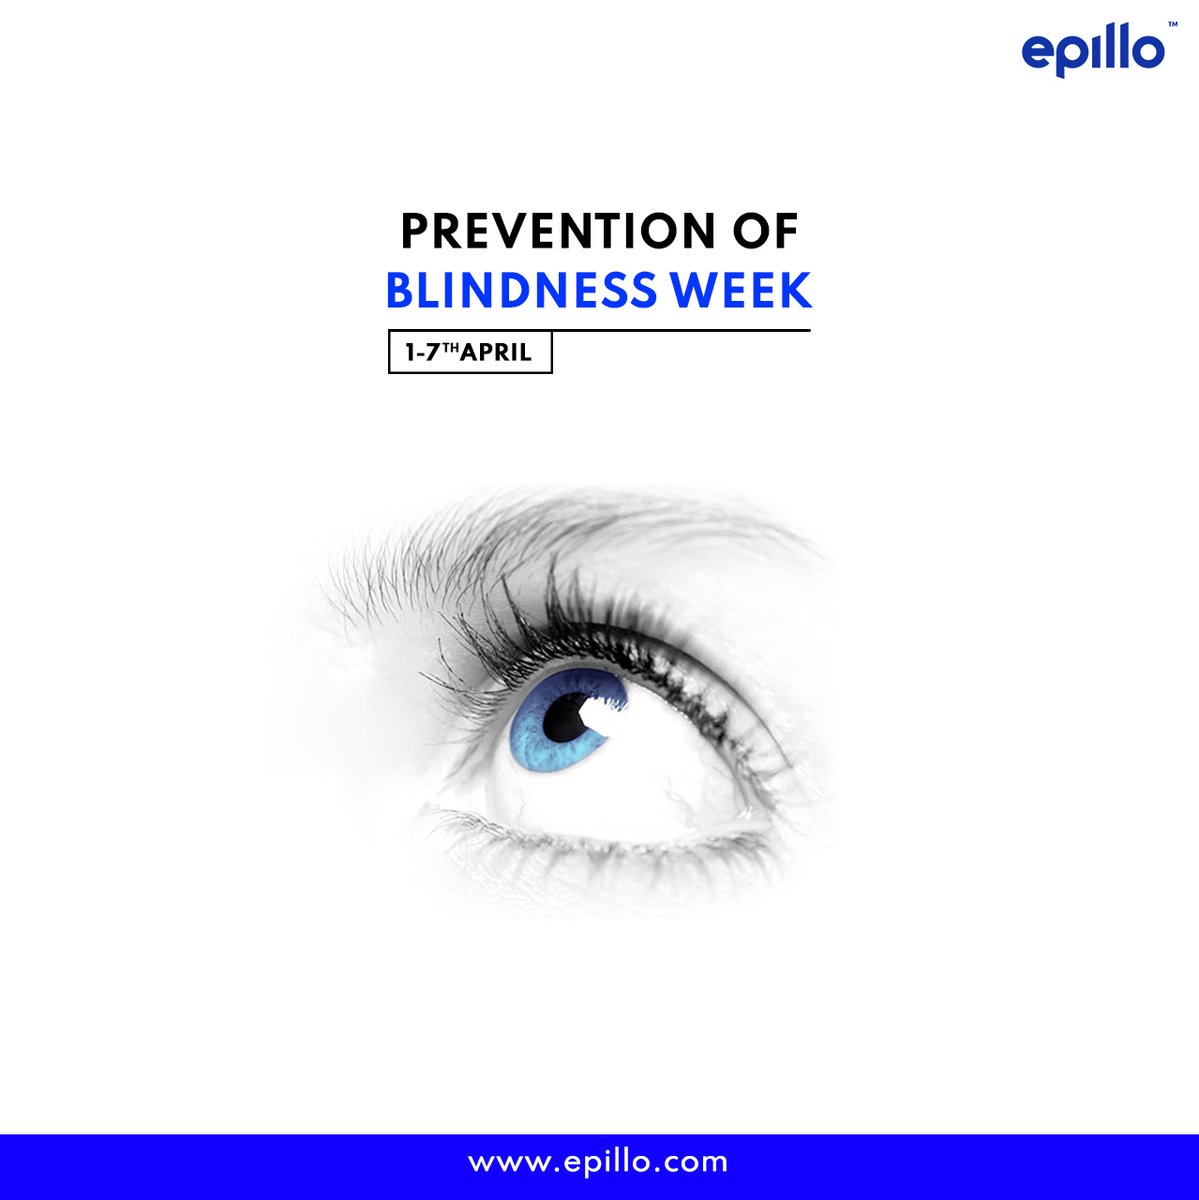 On this Prevention of Blindness Week, let us get together to raise awareness among people and educate them about blindness prevention.

😷Stay Safe, Wear Mask!😷
.
.
.
#eyehealth #eyes #eyeprotection #preventionofblindnessweek #epillo #MedTech #healthcare #SaveSoil #protecteyes